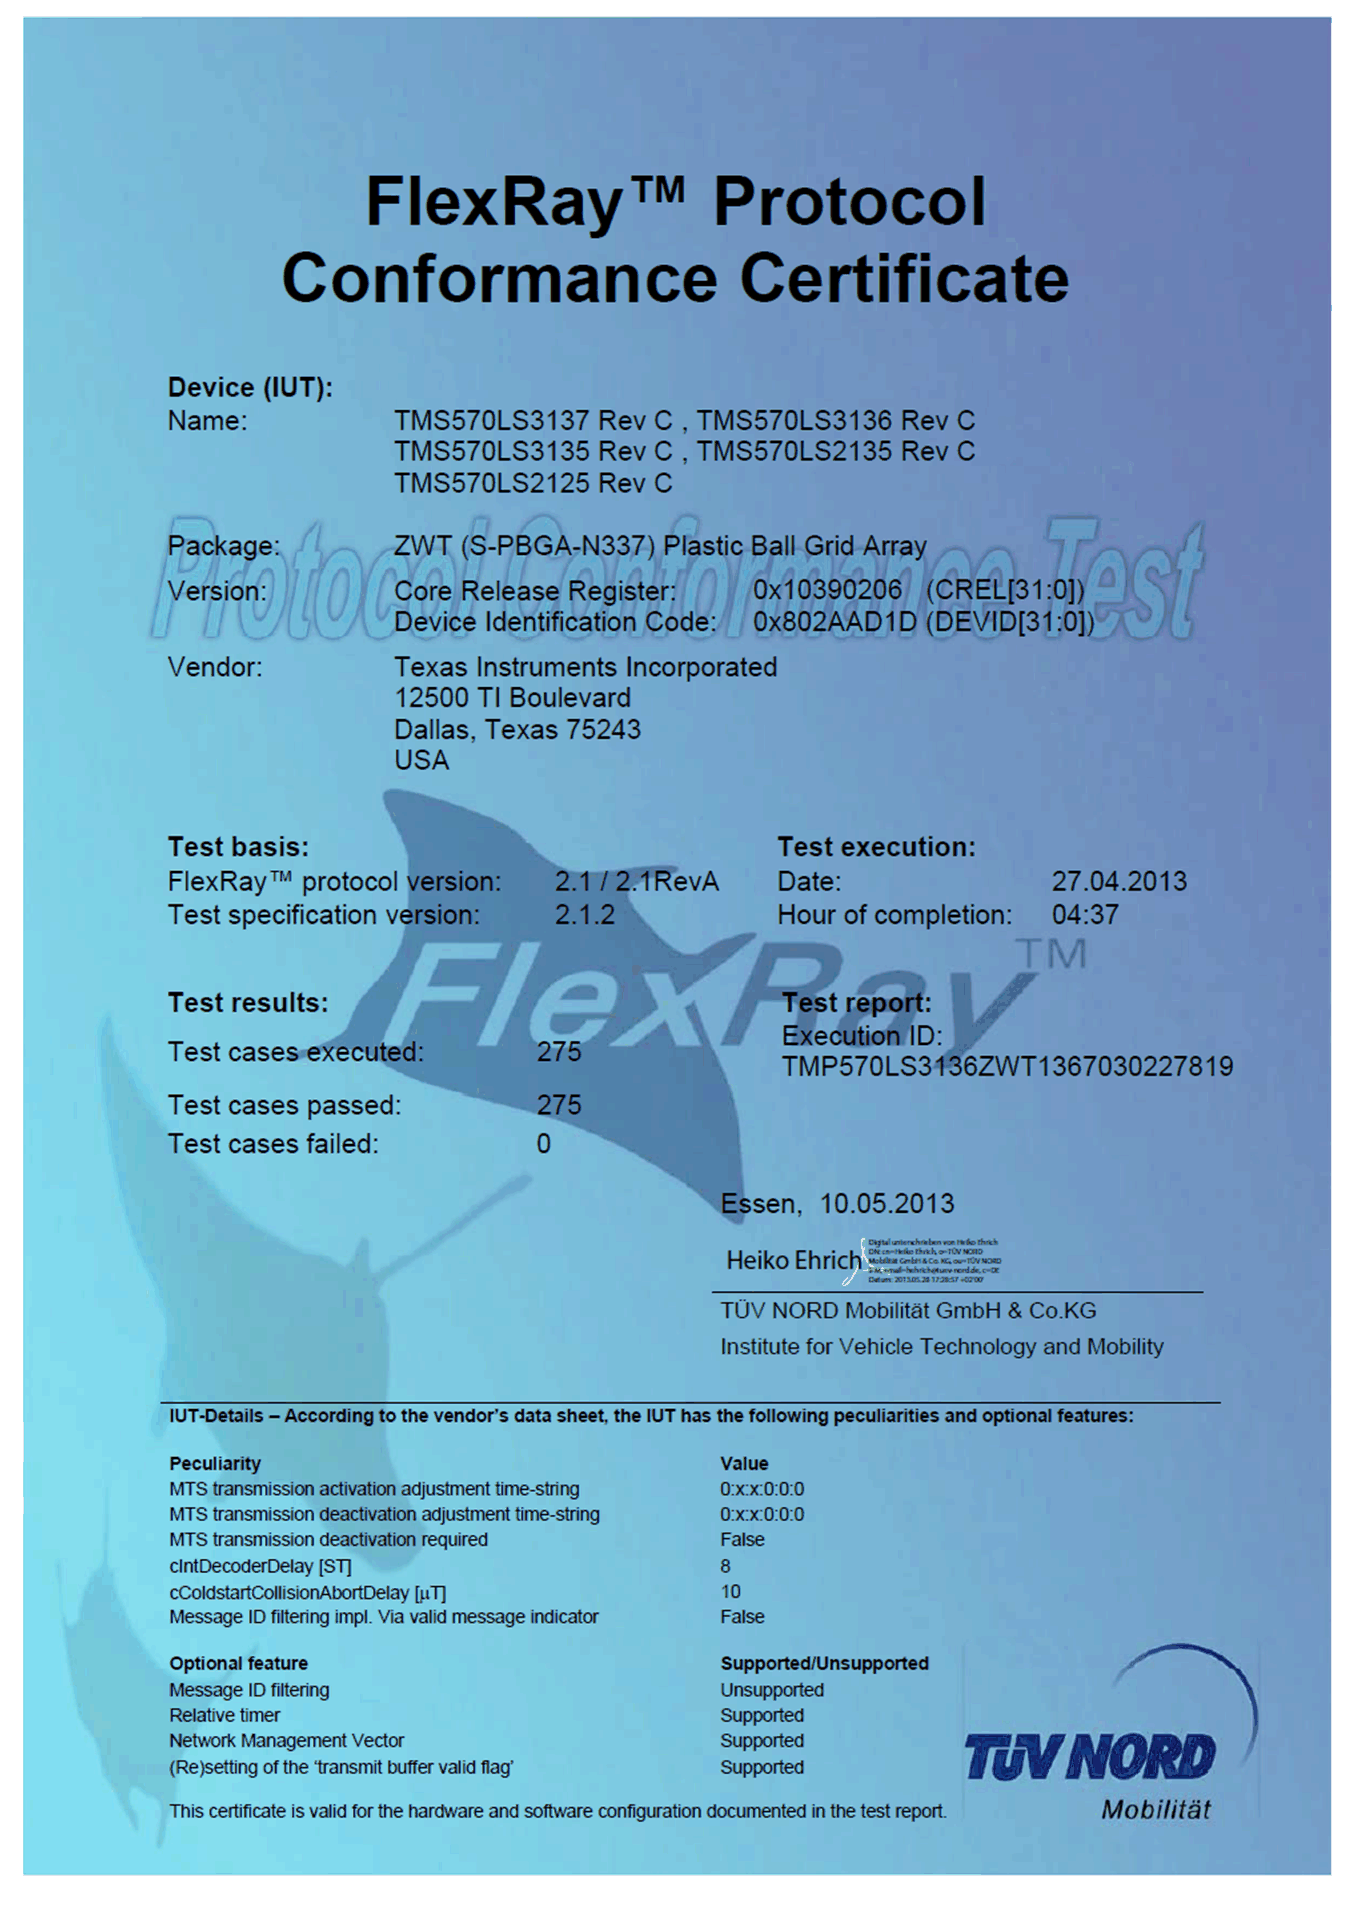 FlexRay_Certification_TMS570LS3137ZWT_RevC_2013-04-27.gif